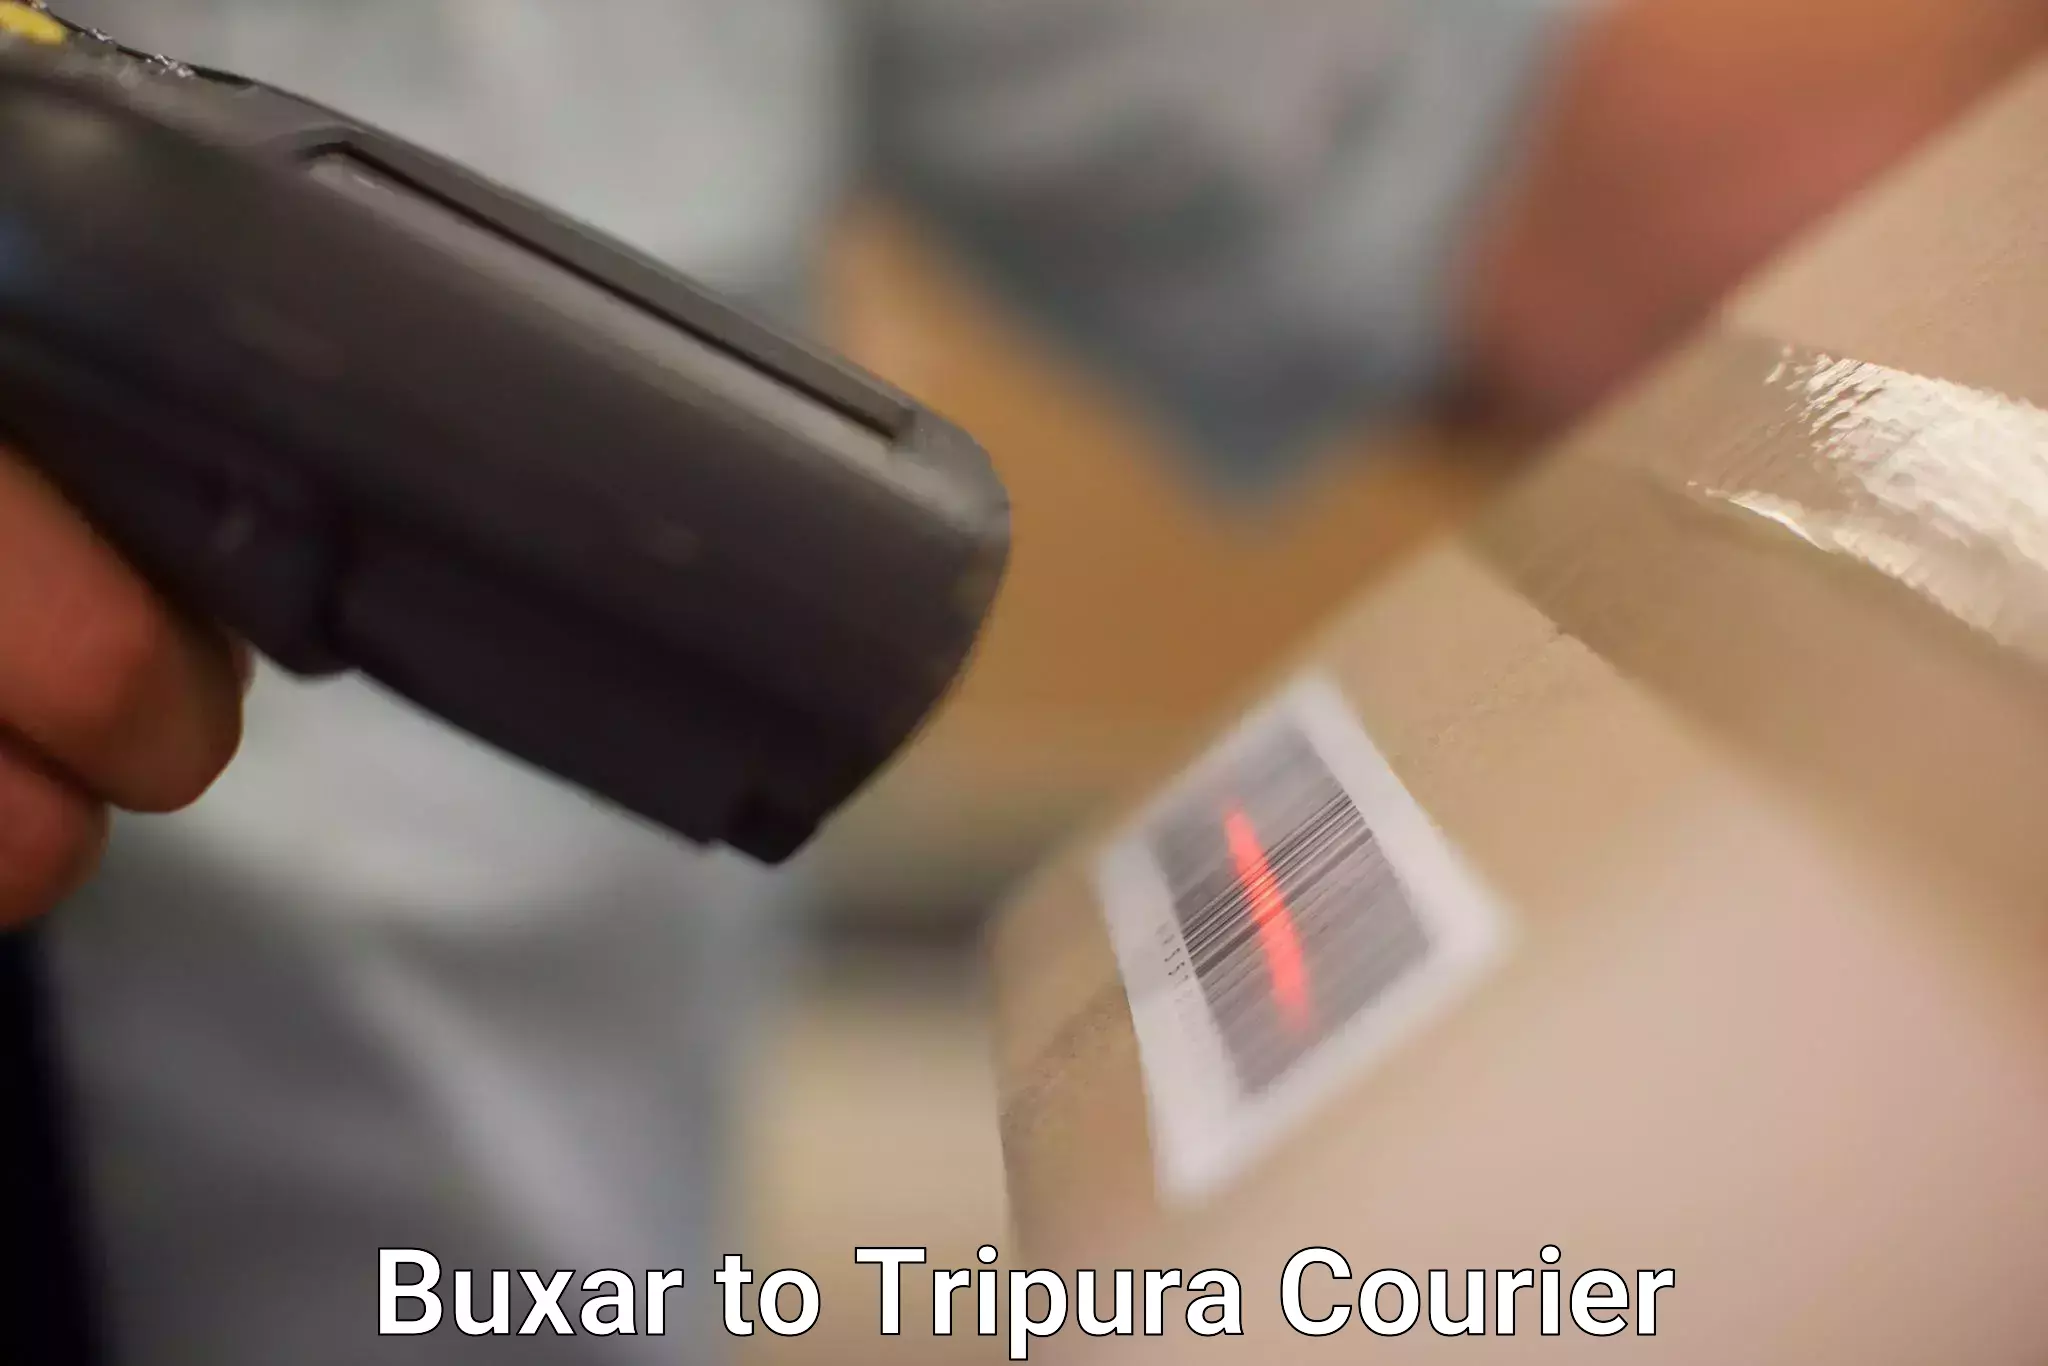 Package delivery network Buxar to Udaipur Tripura